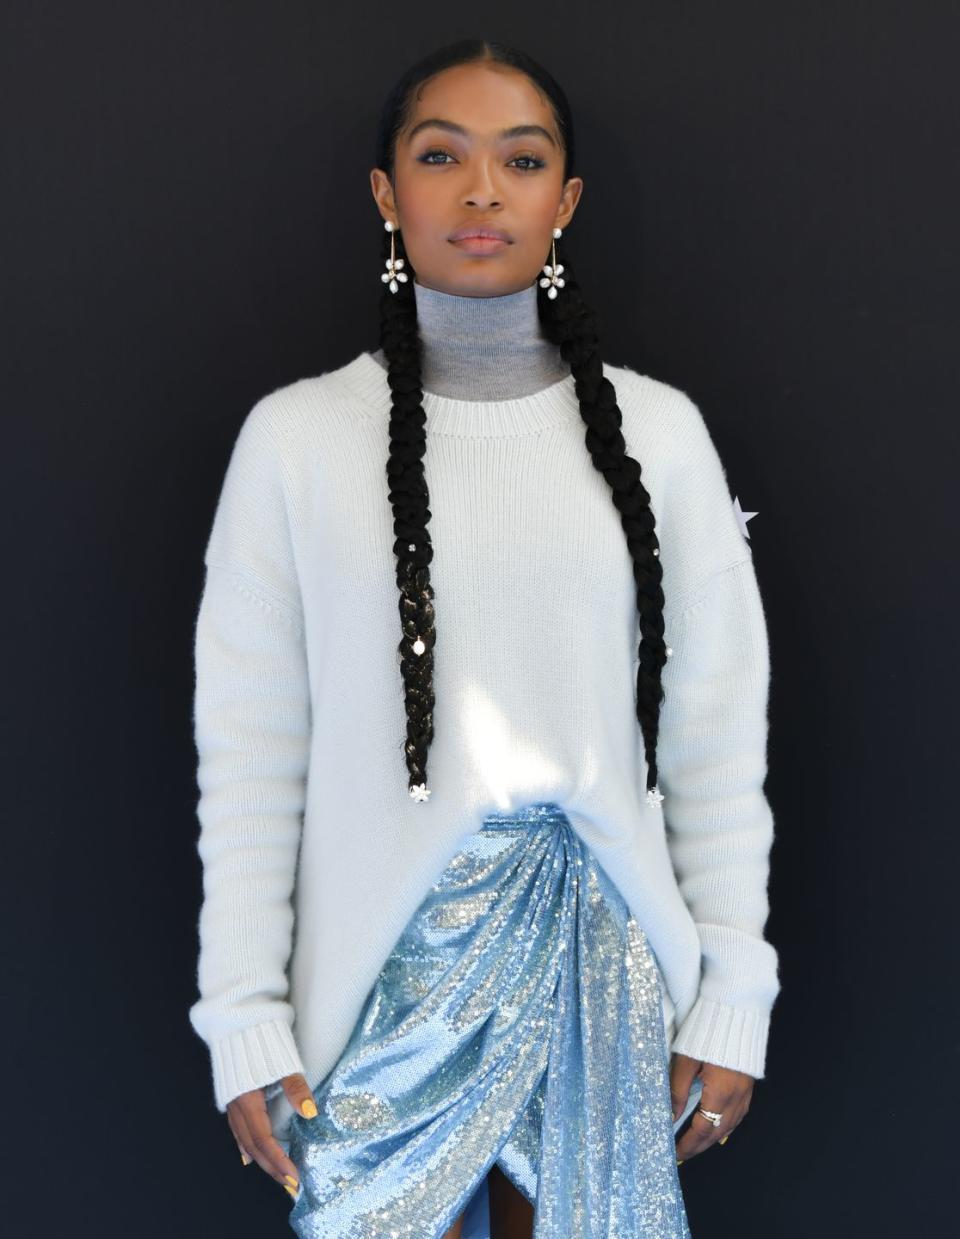 <p>The actress stepped out for the 2019 BET Awards working a pair of XXL embellished rapunzel braids courtesy of hairstylist Kendall Dorsey.</p>